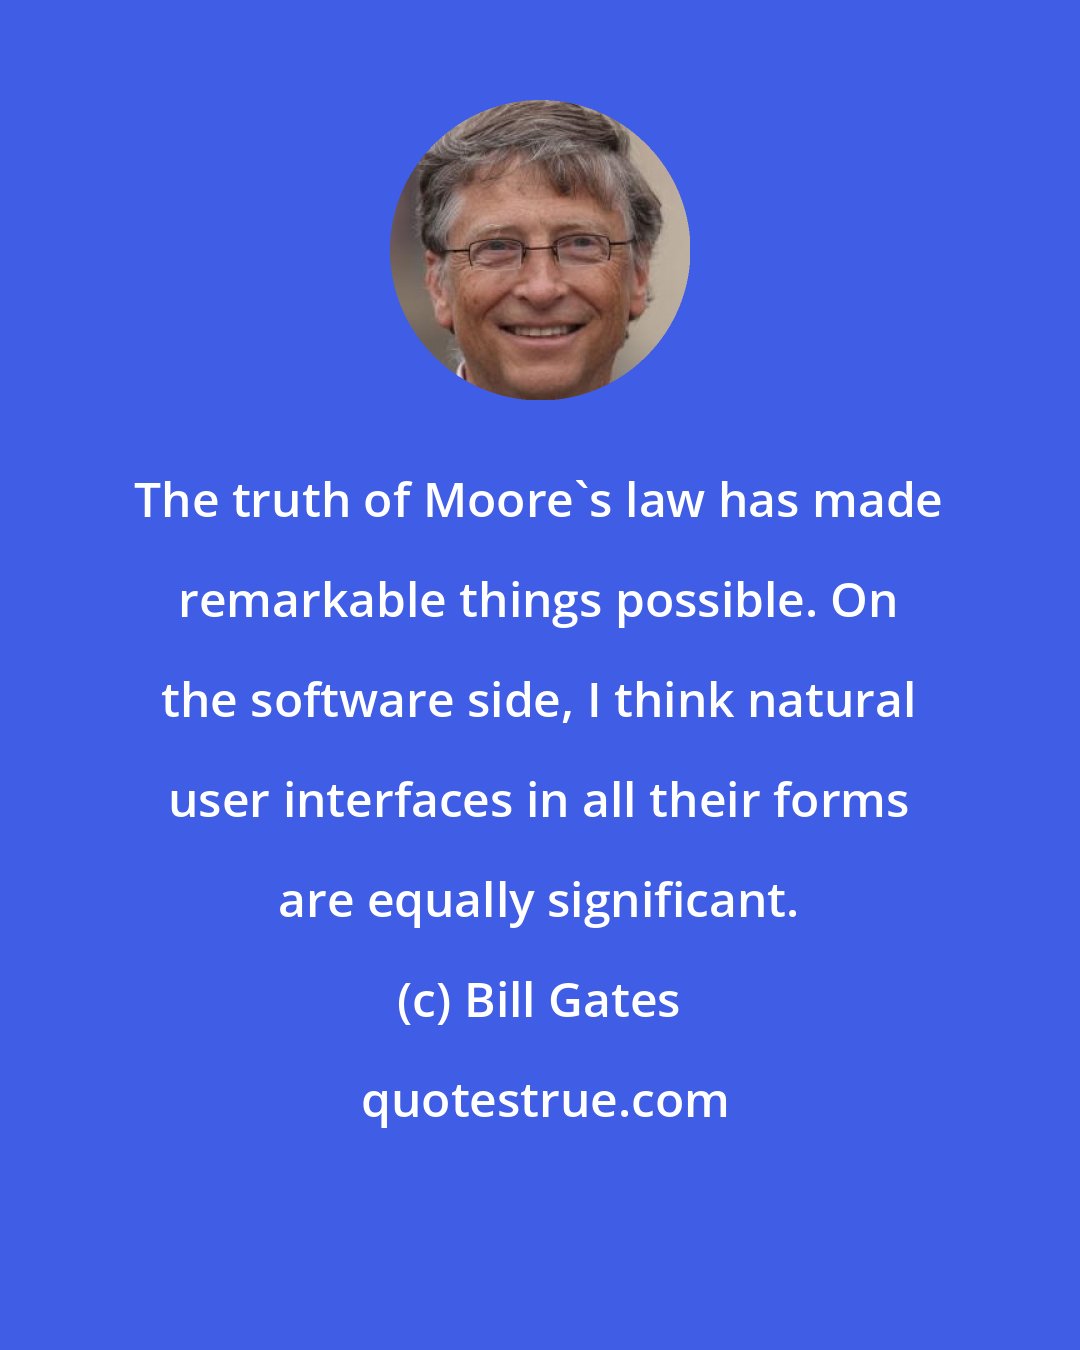 Bill Gates: The truth of Moore's law has made remarkable things possible. On the software side, I think natural user interfaces in all their forms are equally significant.